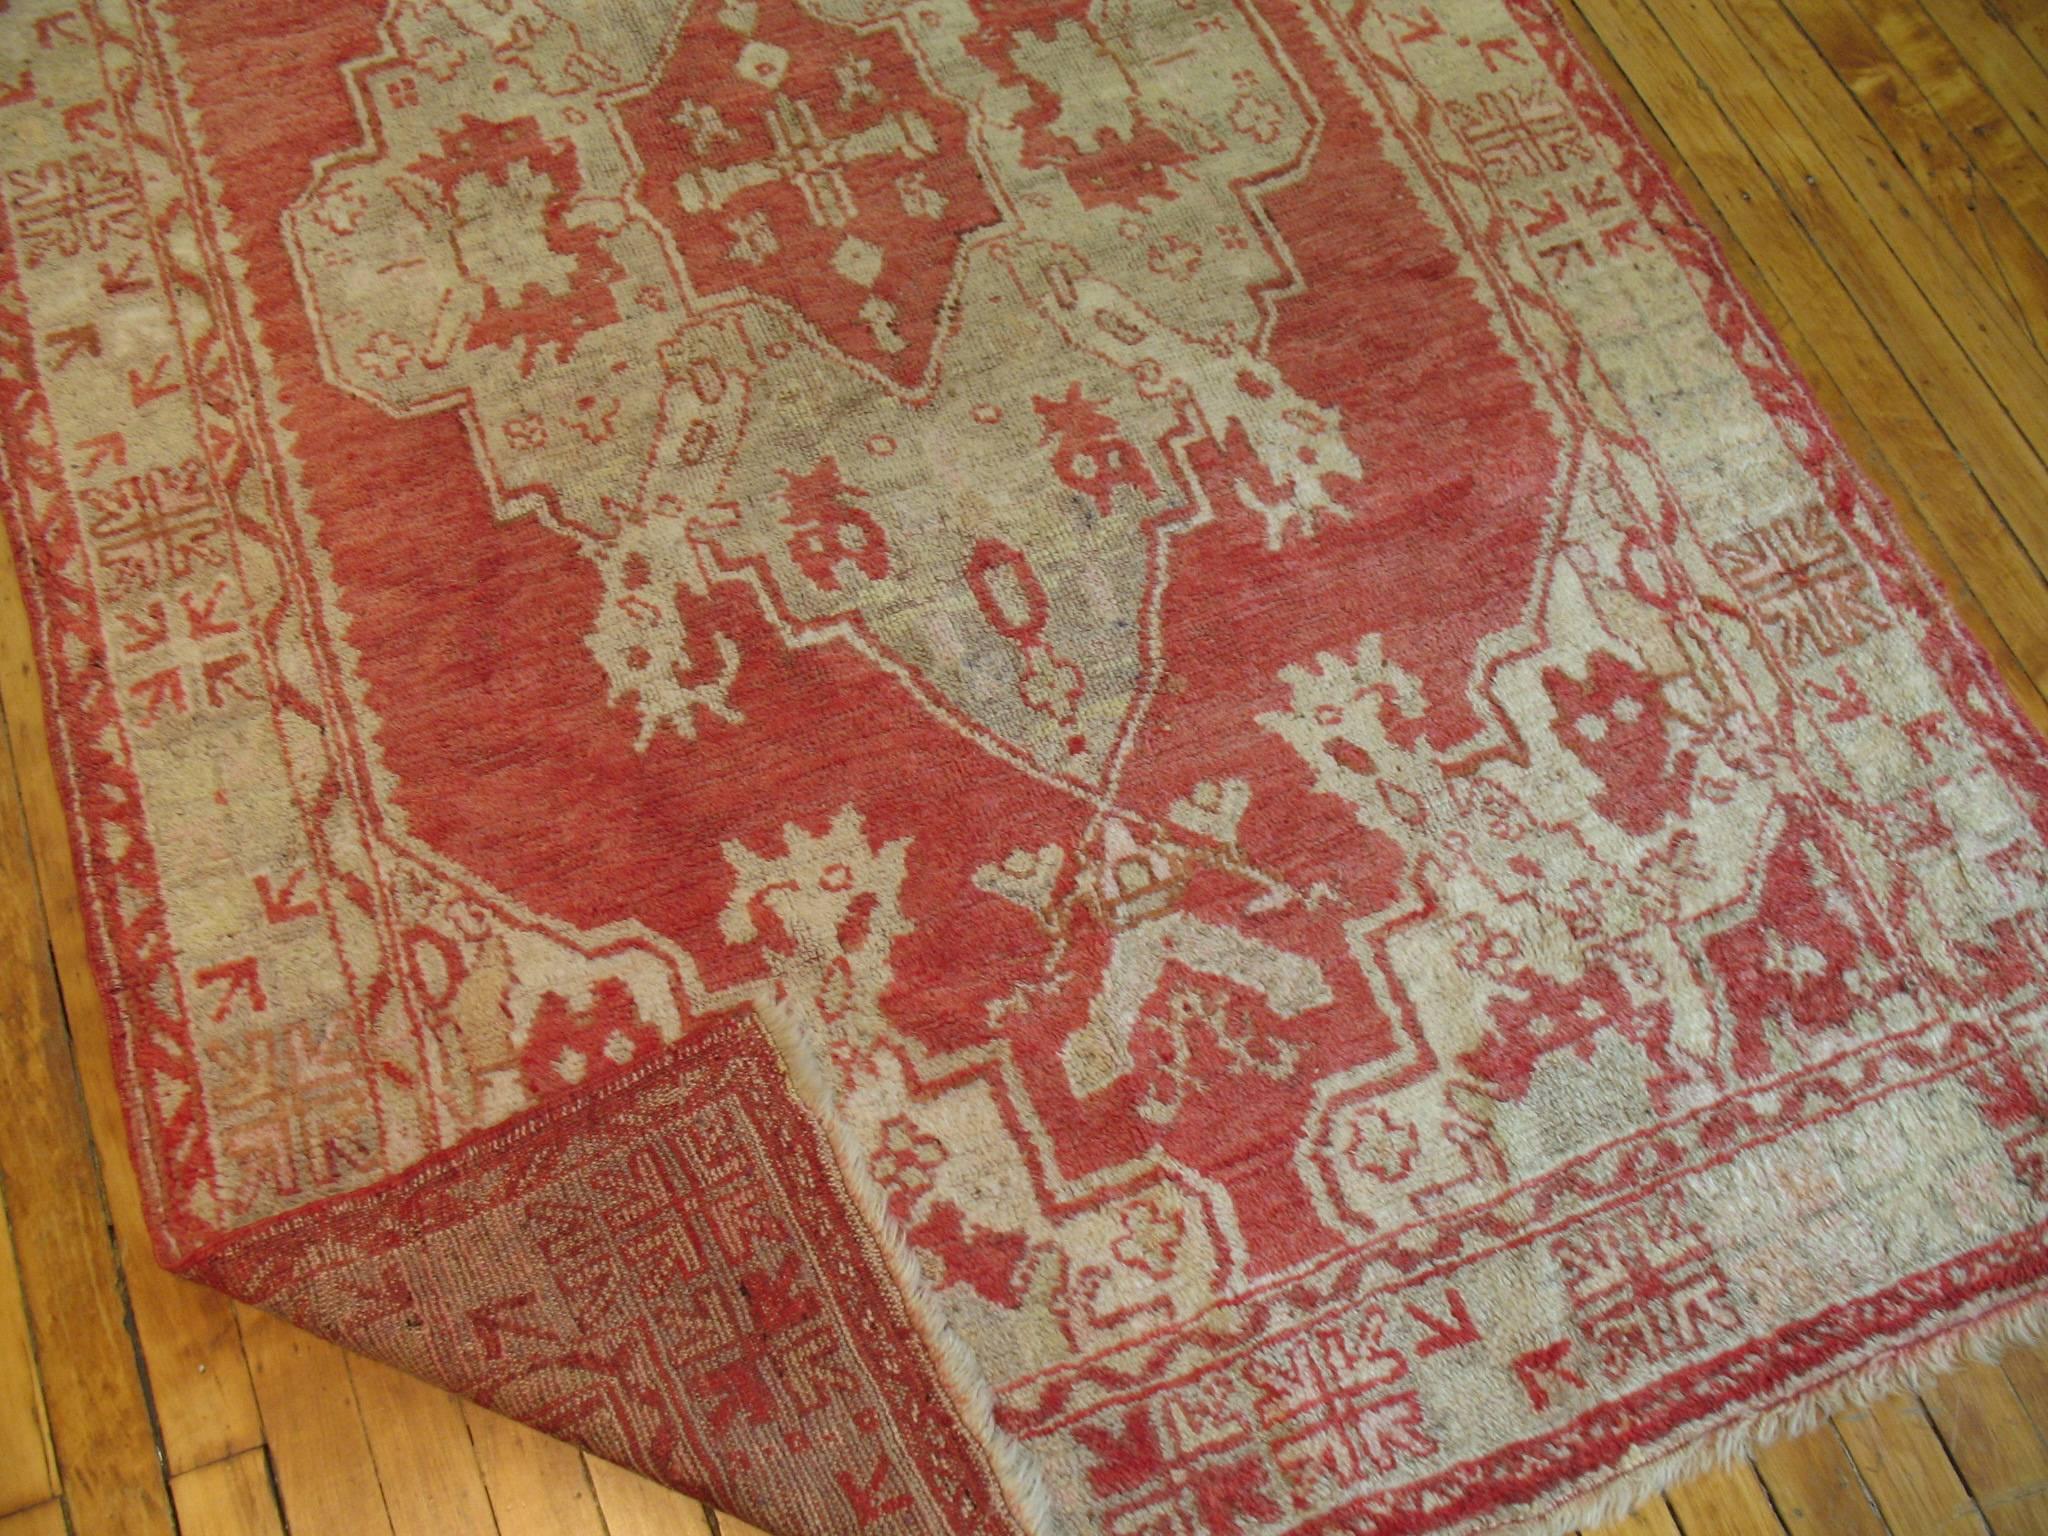 Accent size Turkish Oushak rug with a red background accents light green ivory and gray.

Measures: 4'2'' x 6'9''.